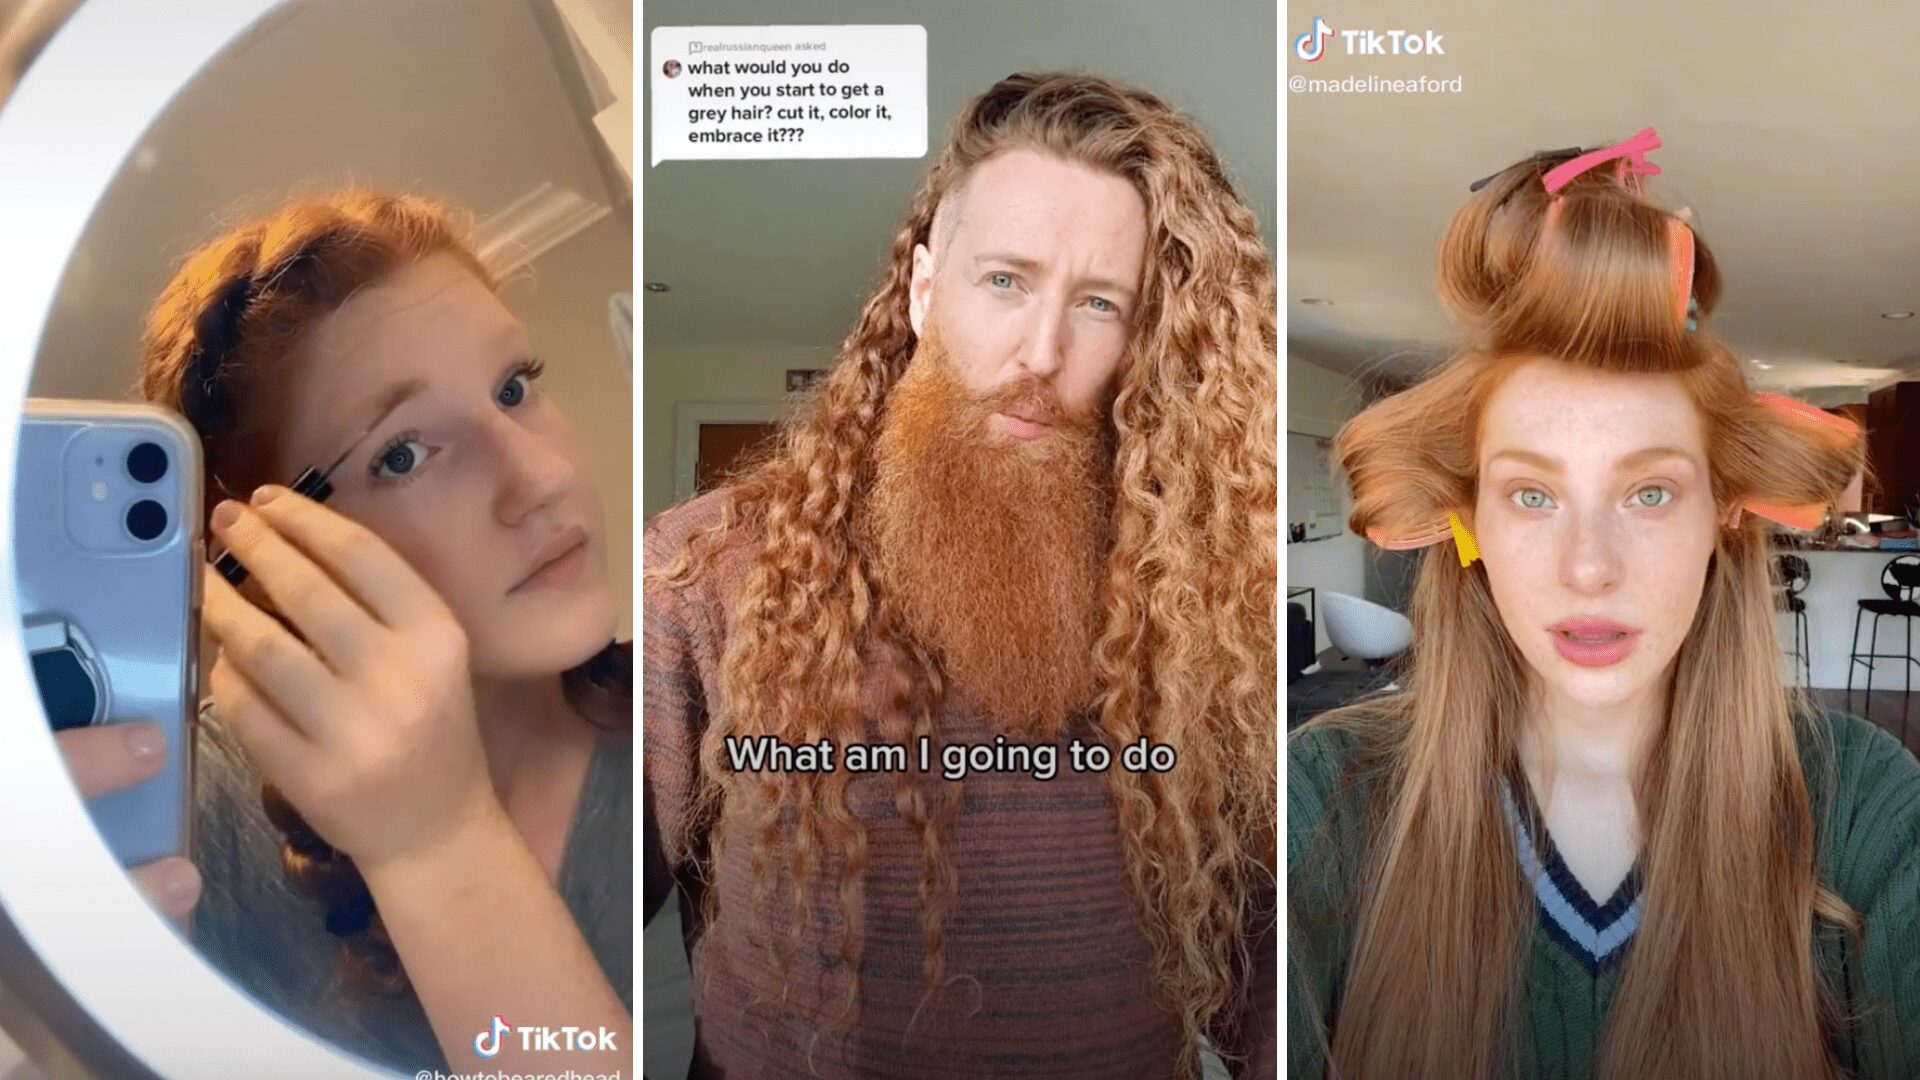 Top 10 Viral TikTok Redhead Beauty Videos You Need to Know About in 2022